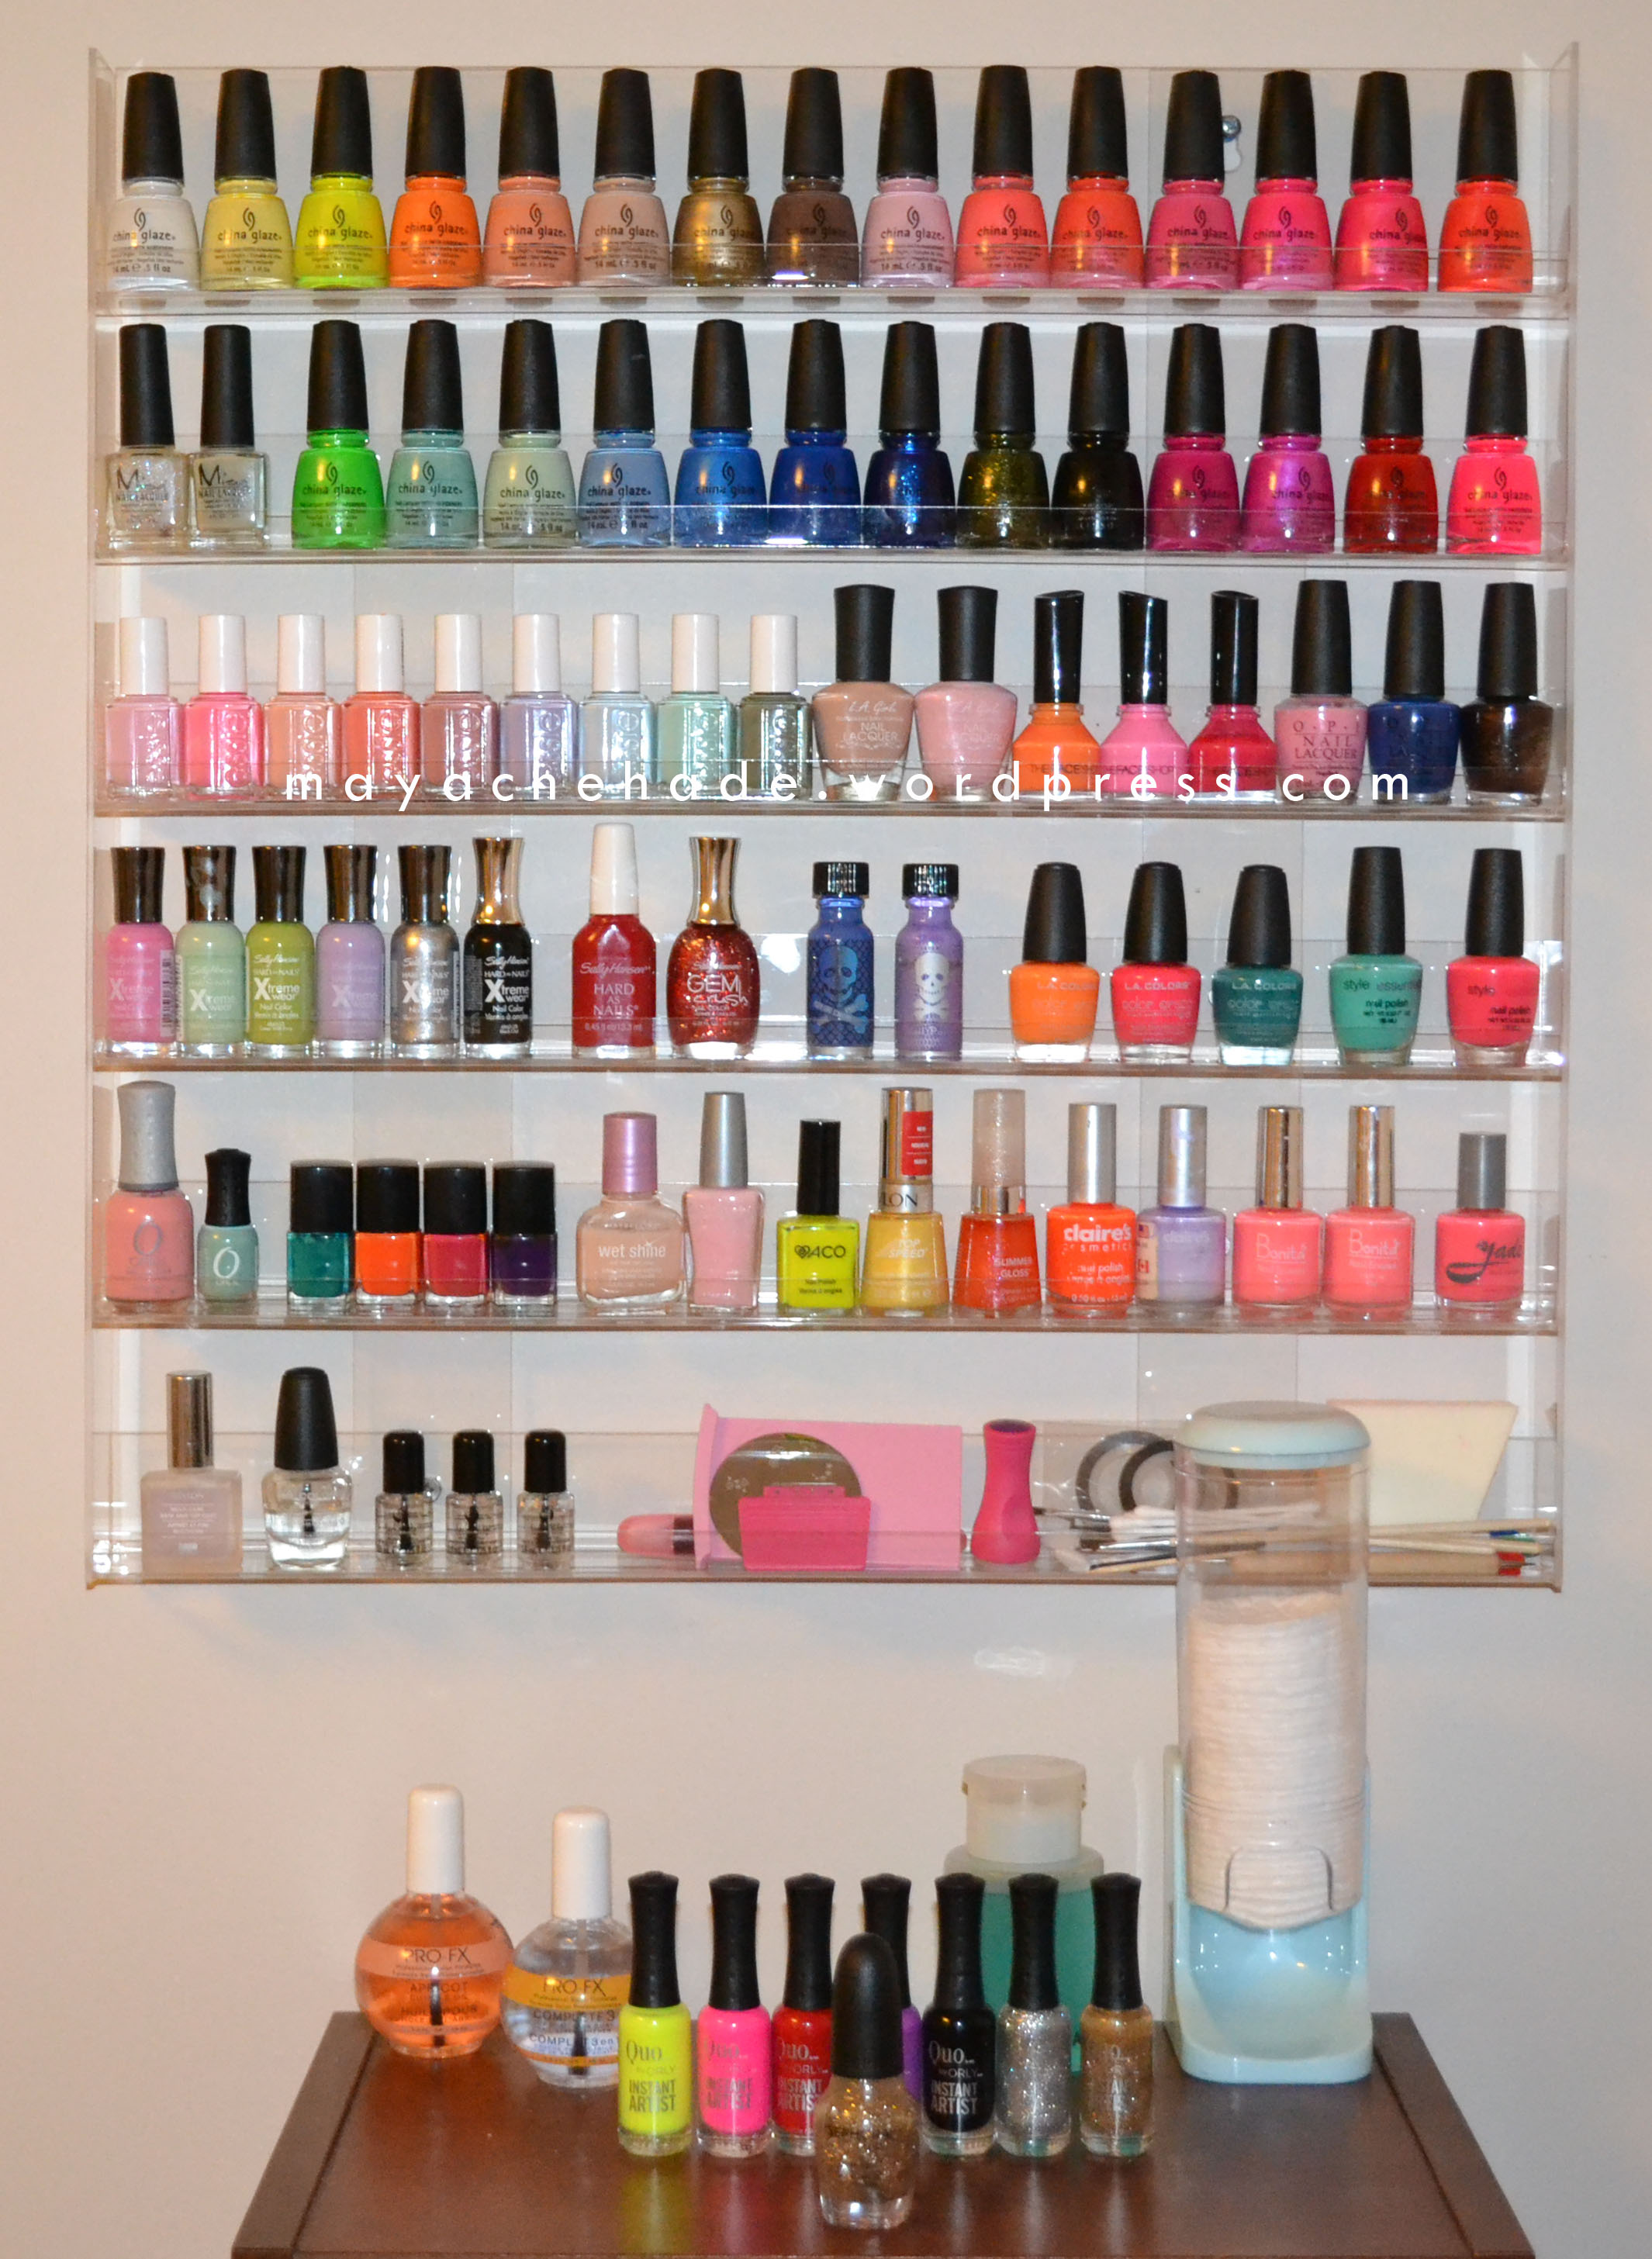 Here is the promised photo of my nail polish collection